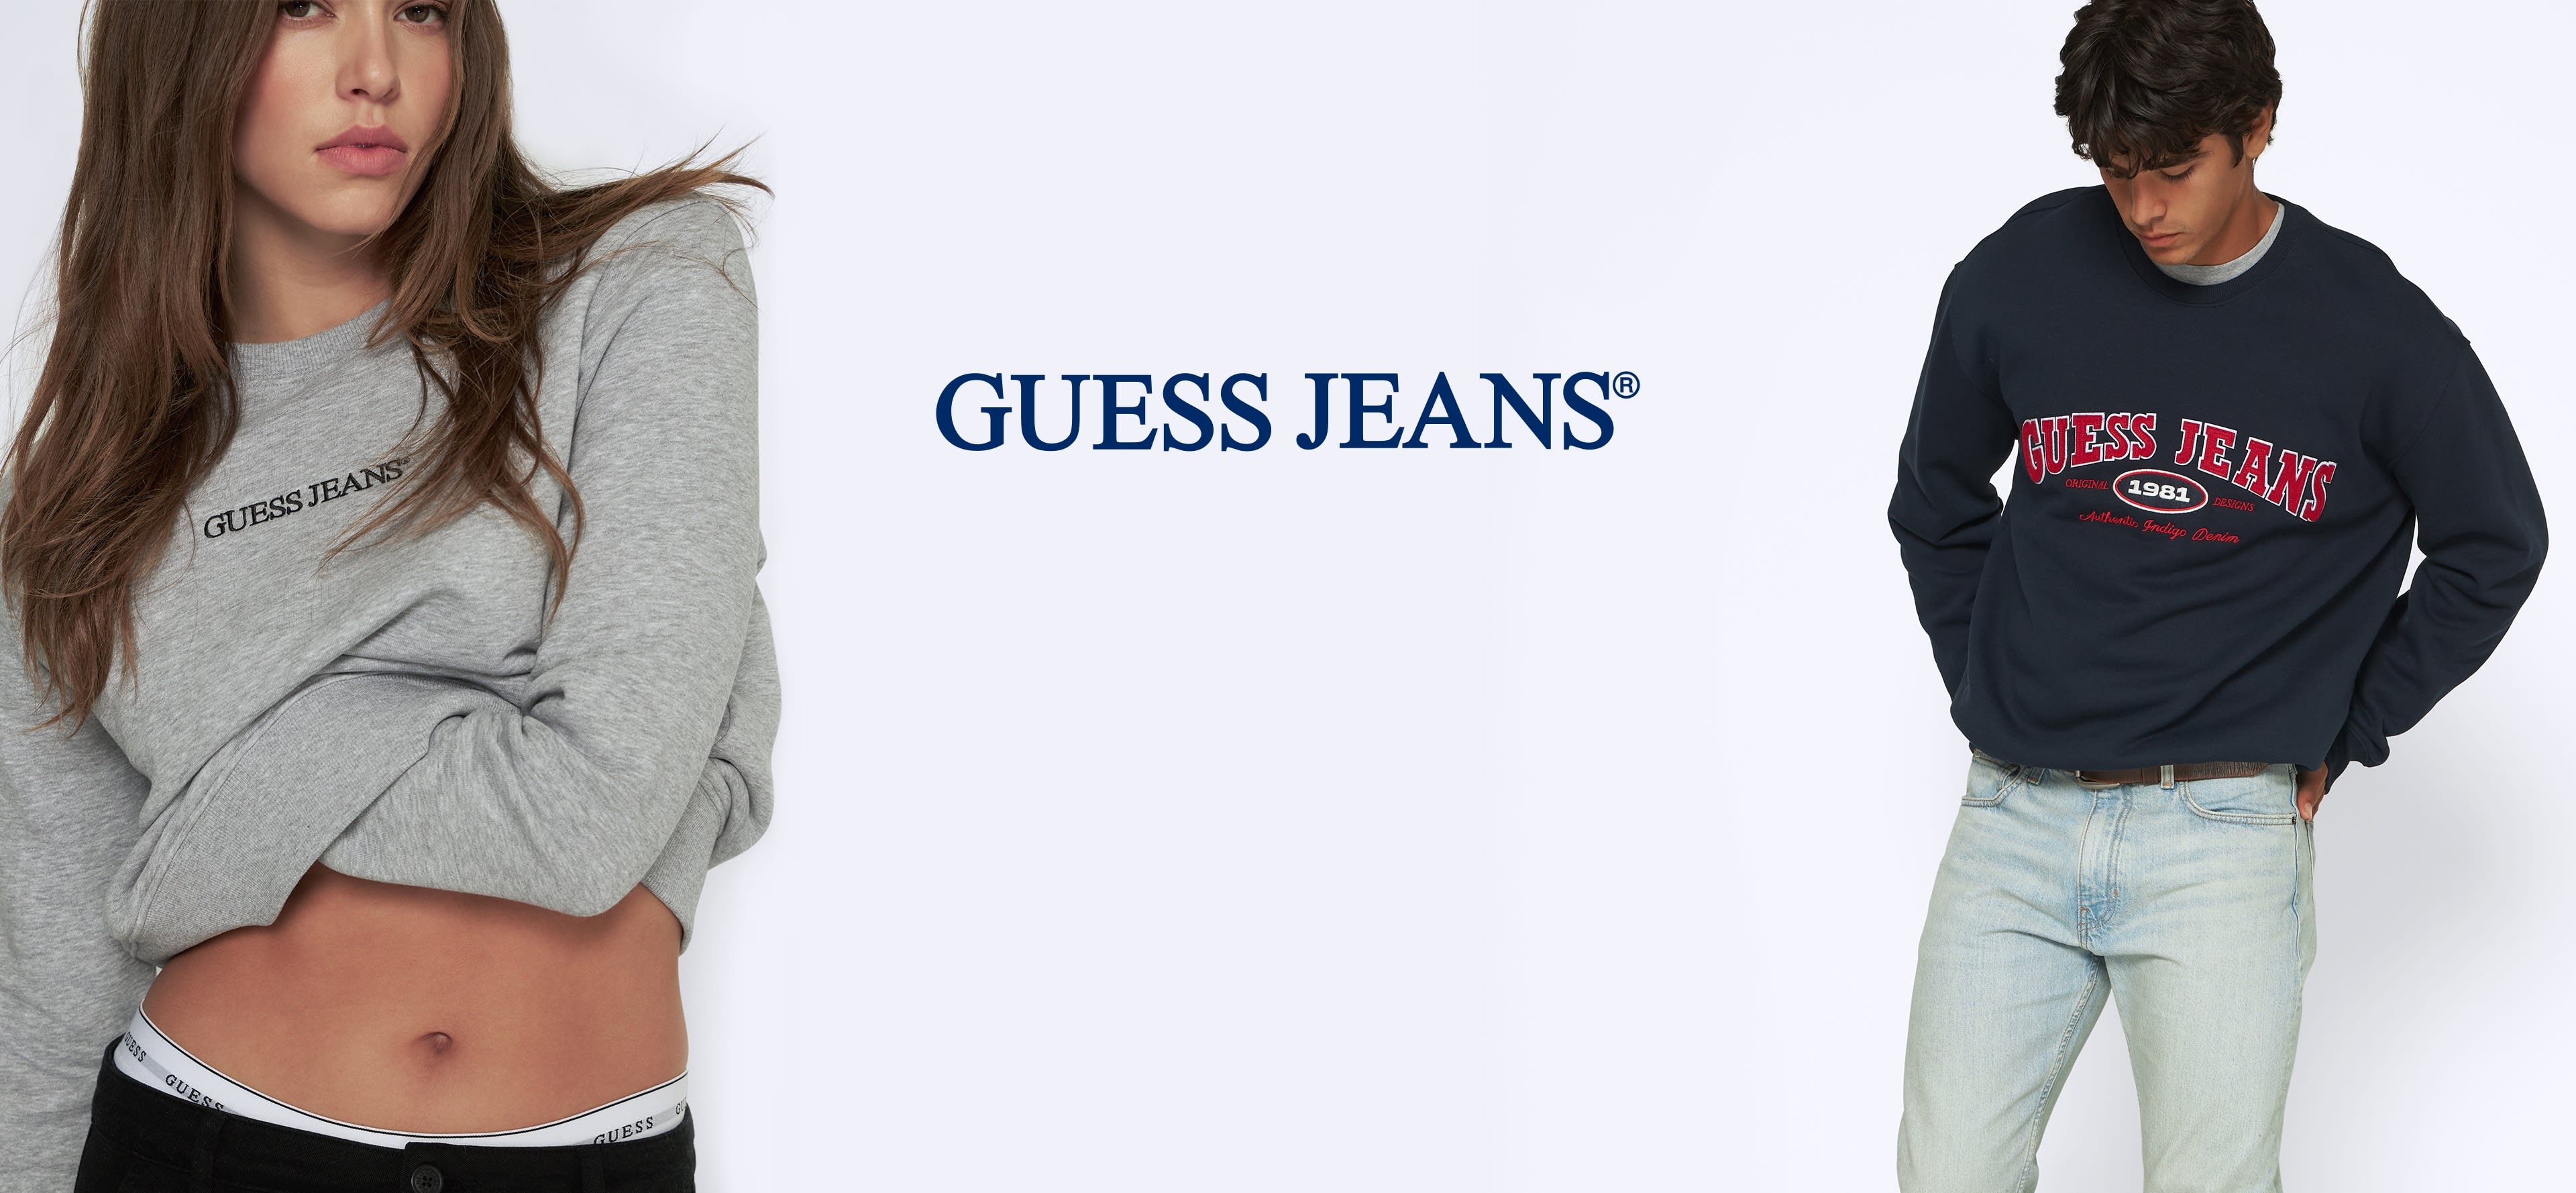 Shop new GUESS Jeans for women and men.